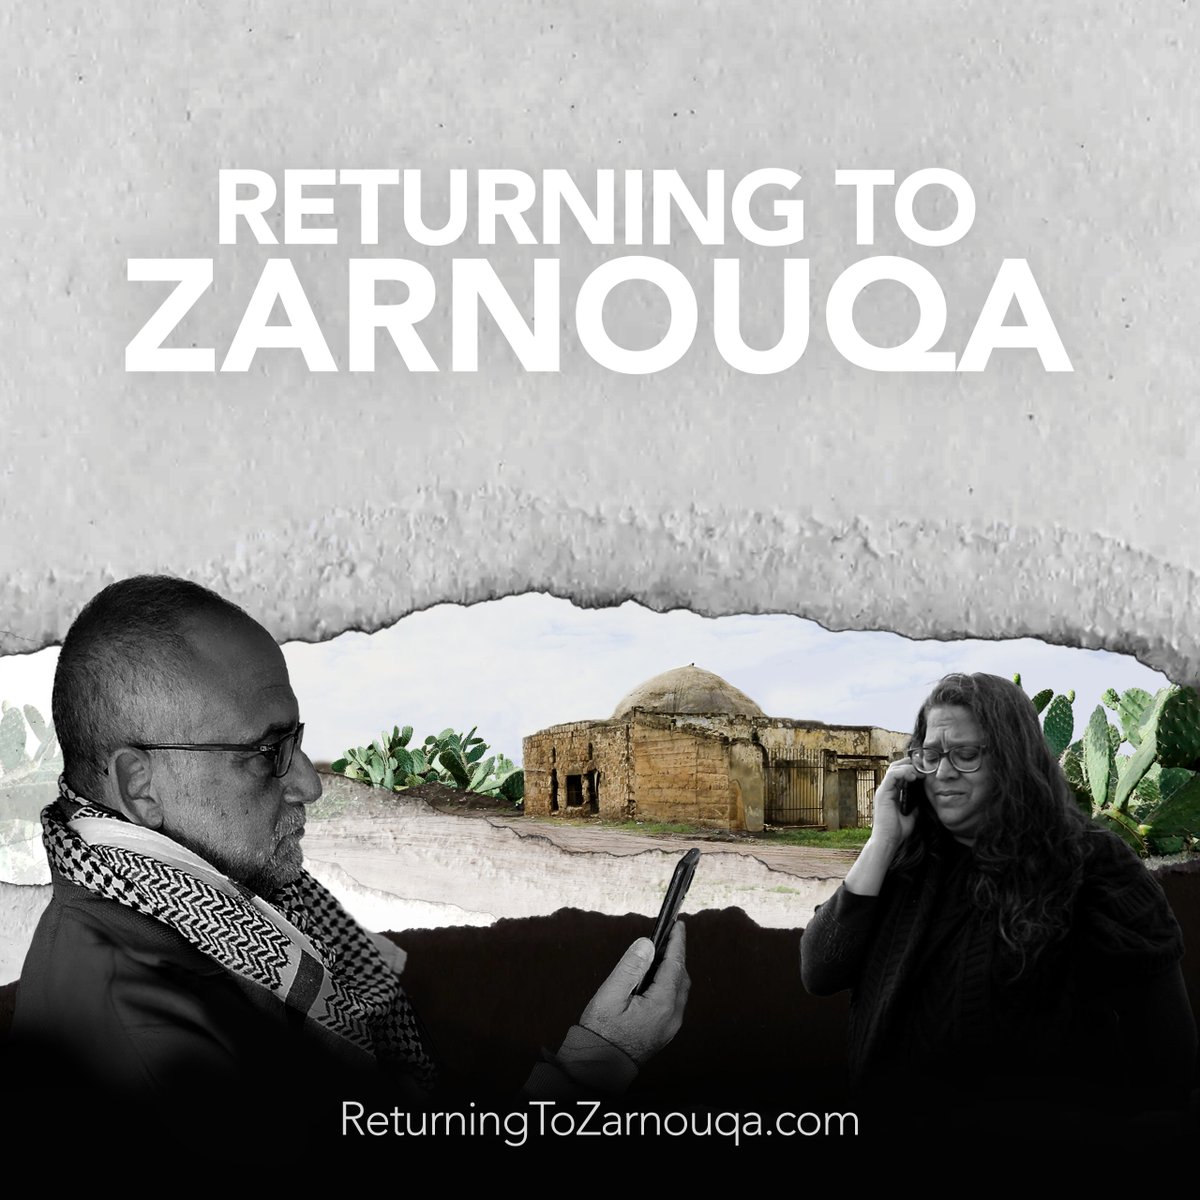 A newly released short documentary, Returning to Zarnouqa, is a Palestinian story of generational displacement, genocide and the inevitability of Return. Watch the film here: ReturningToZarnouqa.com
#RightOfReturn #CeasefireNOW #Nakba #Gaza #GazaGenocide #BDS  #JewsAgainstZionism